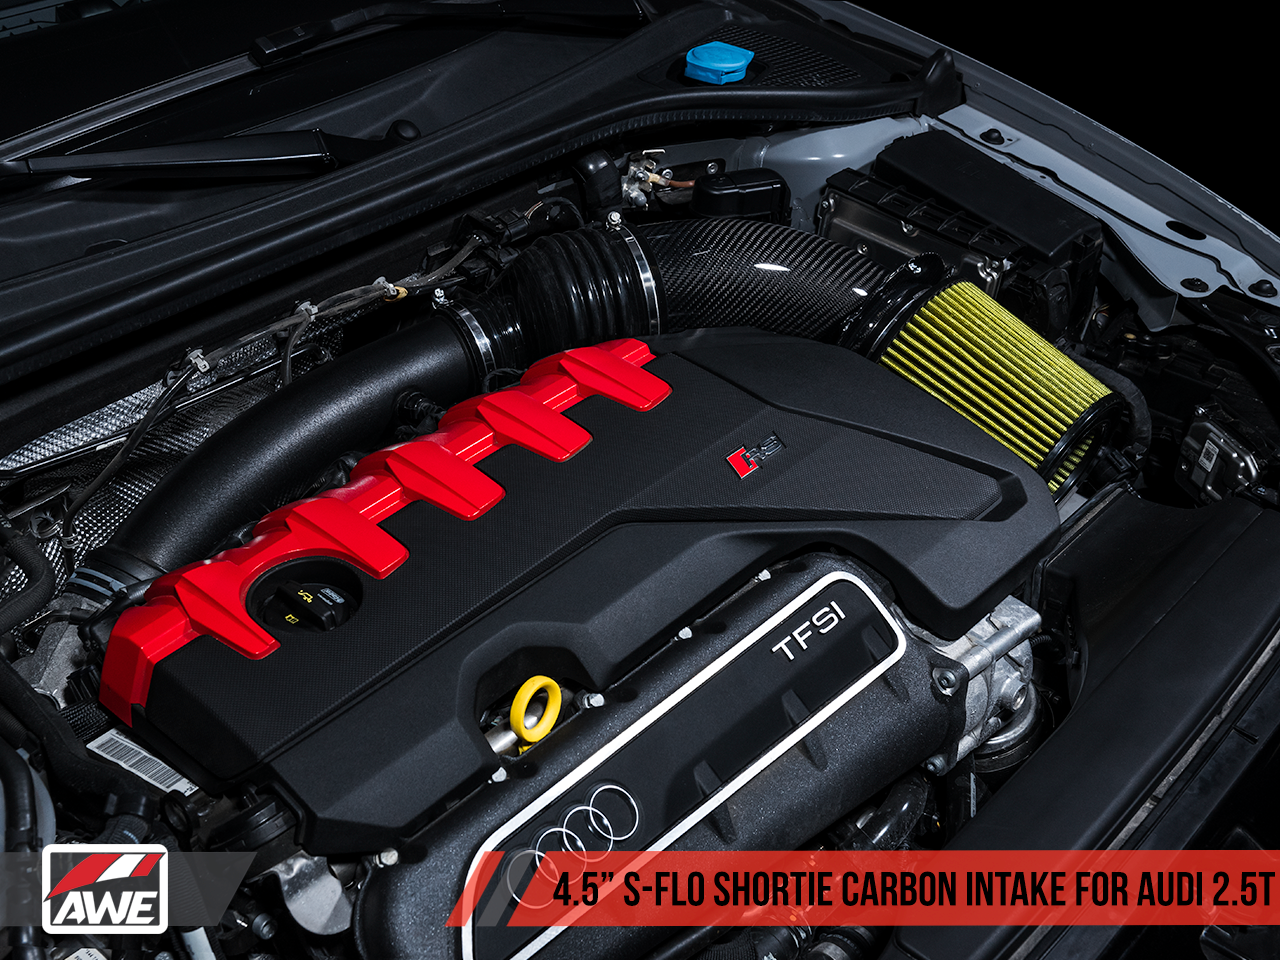 AWE 4.5" S-FLO Shortie Carbon Intake for Audi RS 3 / TT RS - 0